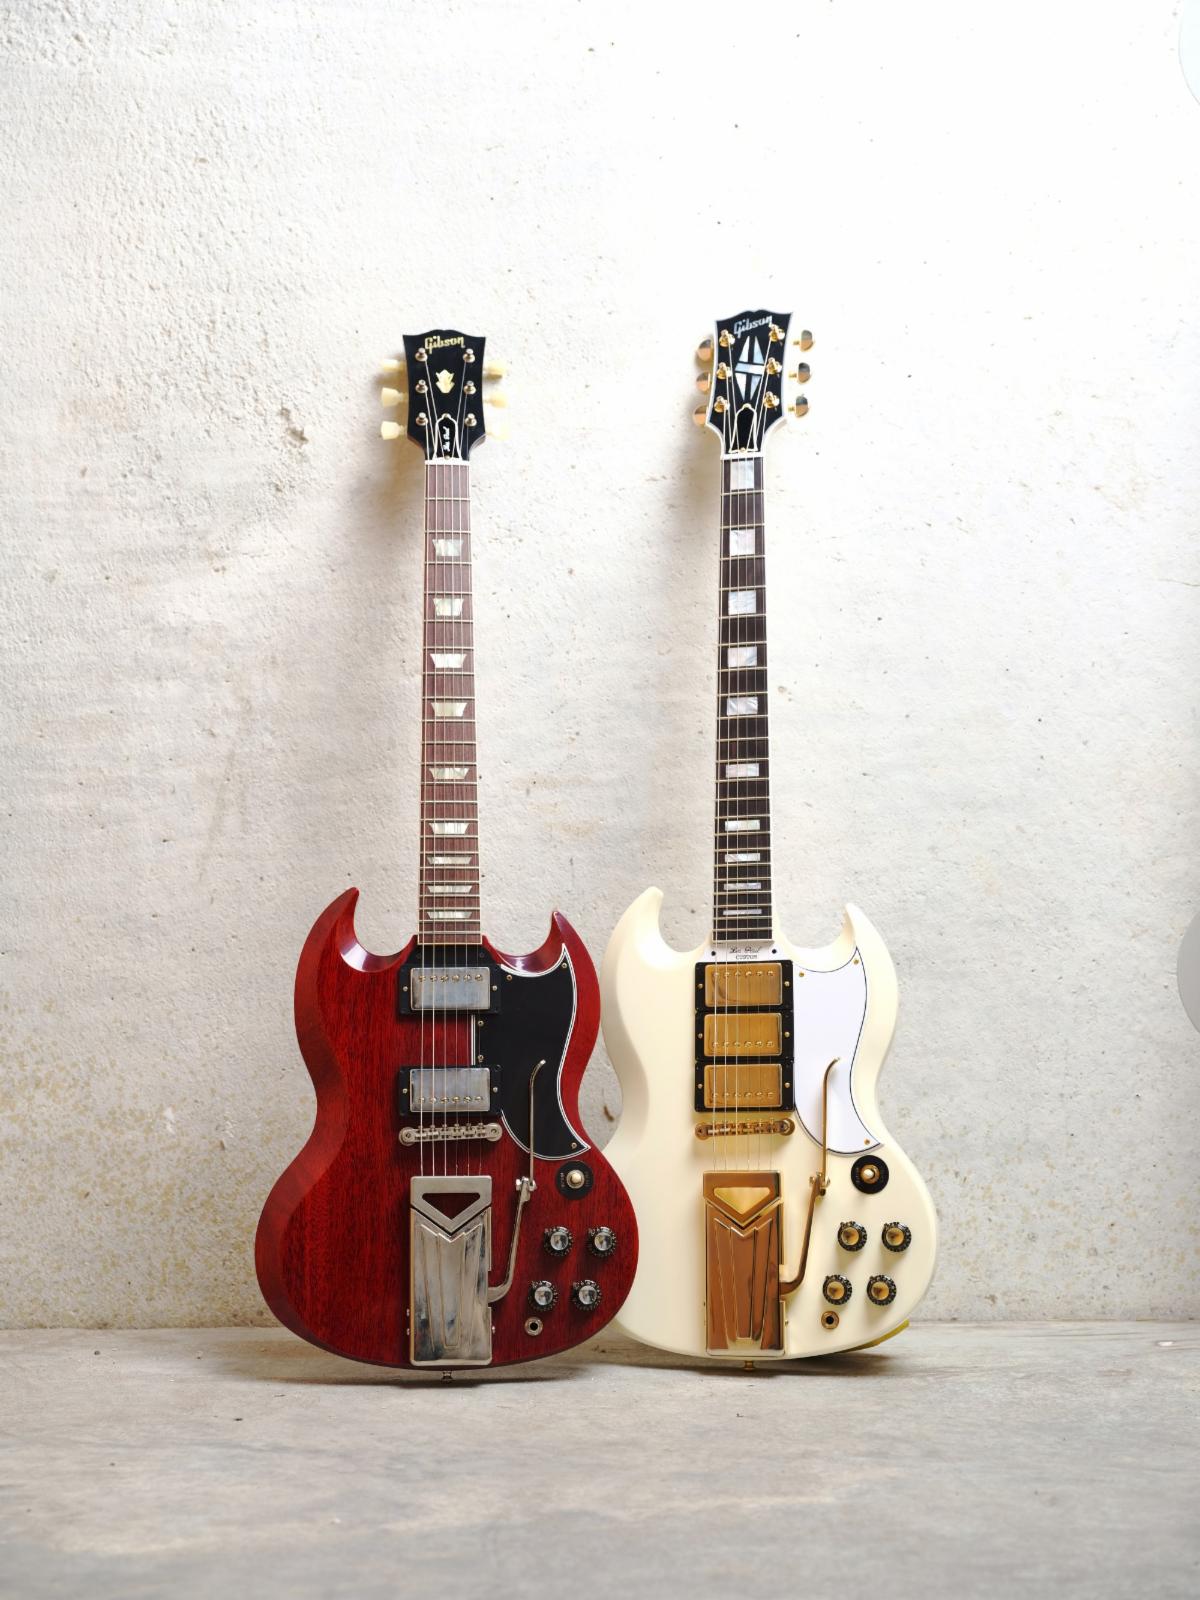 Gibson 60th Anniversary 1961 SG Standard with Sideways Vibrola in Cherry Red VOS and Classic White VOS.